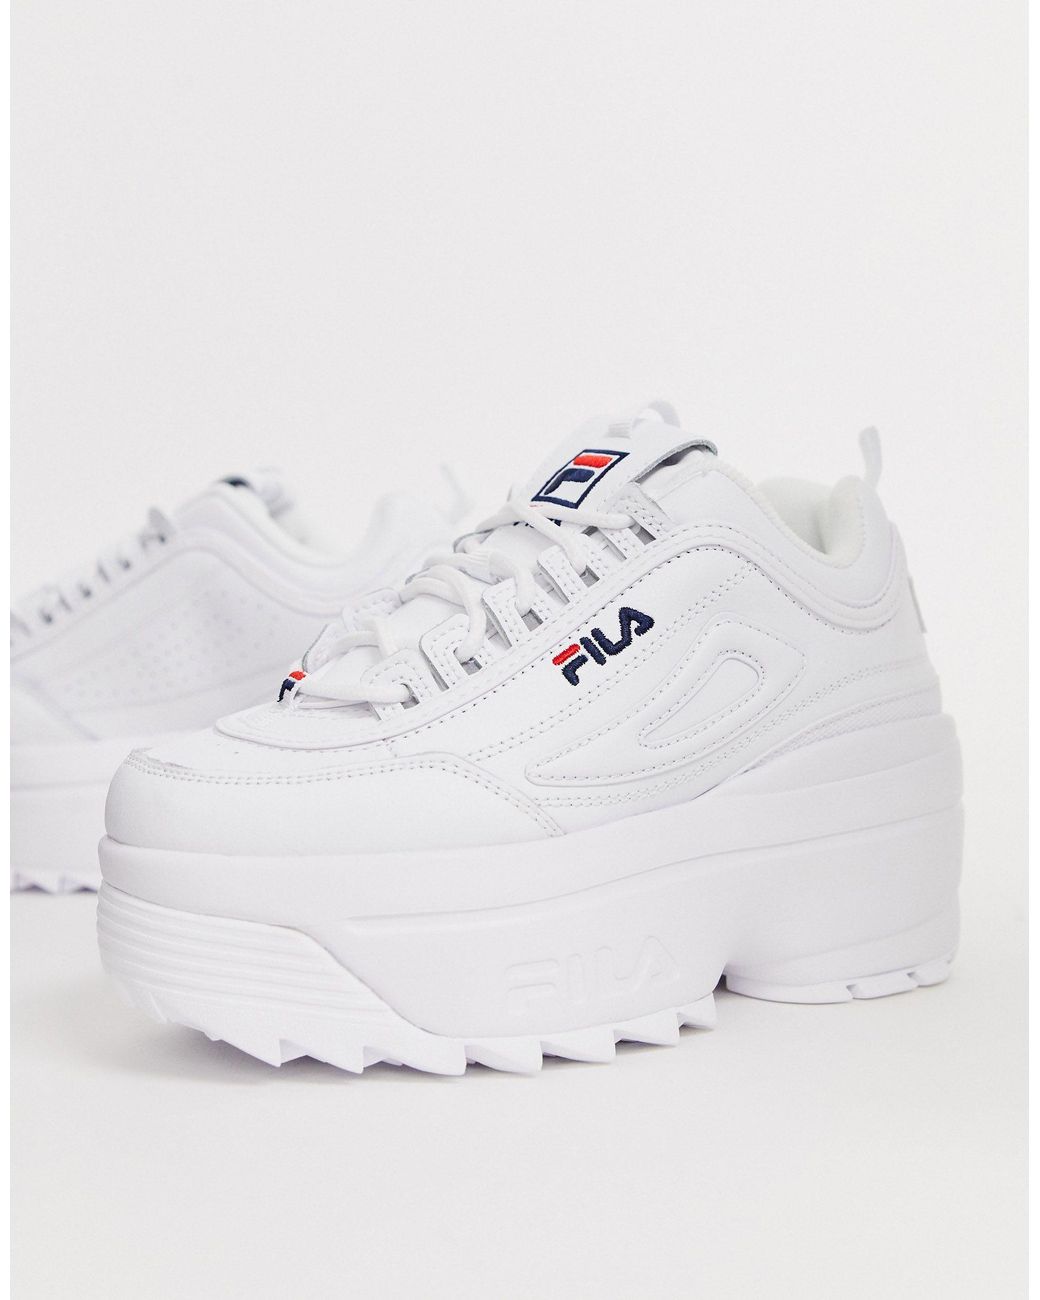 Fila Disrupter Premium In White Lace Up Chunky Platform, 55% OFF